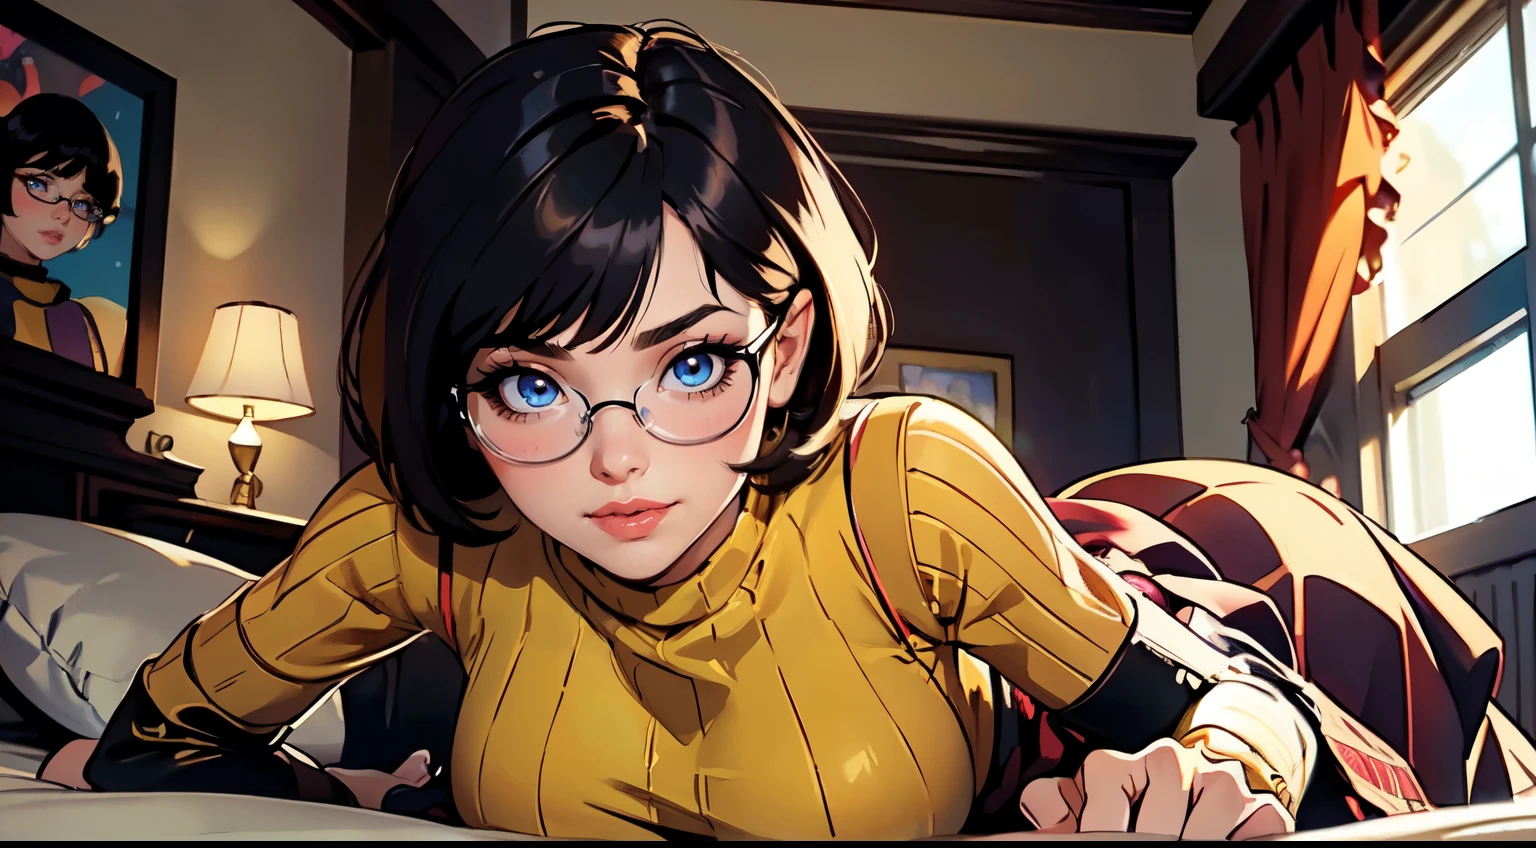 HD, 8k quality, masterpiece, Velma, dream girl, large breasts, beautiful face, blushing, kissing lips, short bob hairstyle, long bangs, perfect makeup, realistic face, detailed eyes, blue eyes, brunette hair, long eyelashes, smiling, spooky bedroom, lying down on bed, thicc body, leaning forward, eyes at viewer, mustard-yellow top, knitted turtle neck sweater, clear lens glasses, cherry-red skirt,  skirt,